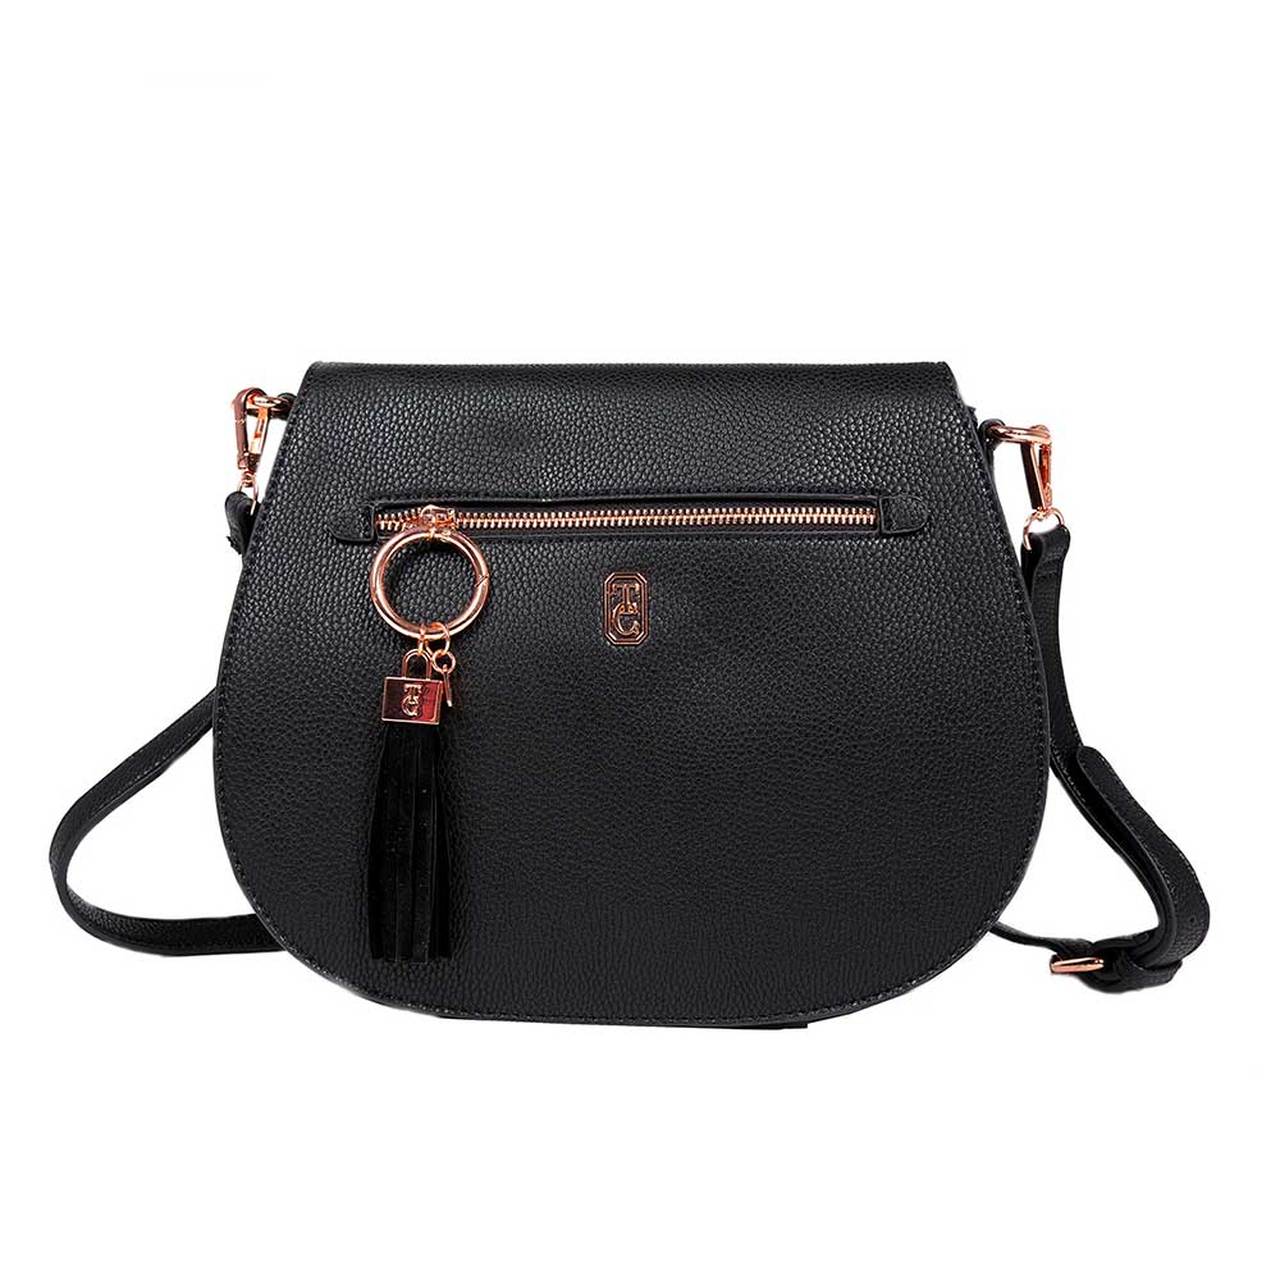 Tipperary Crystal Savoy Large Satchel Bag Black (Rose gold hardware)  This stylish new addition to our bag collection is proving to be very popular, with an outside zip compartment the Savoy bag is stylish and functional.